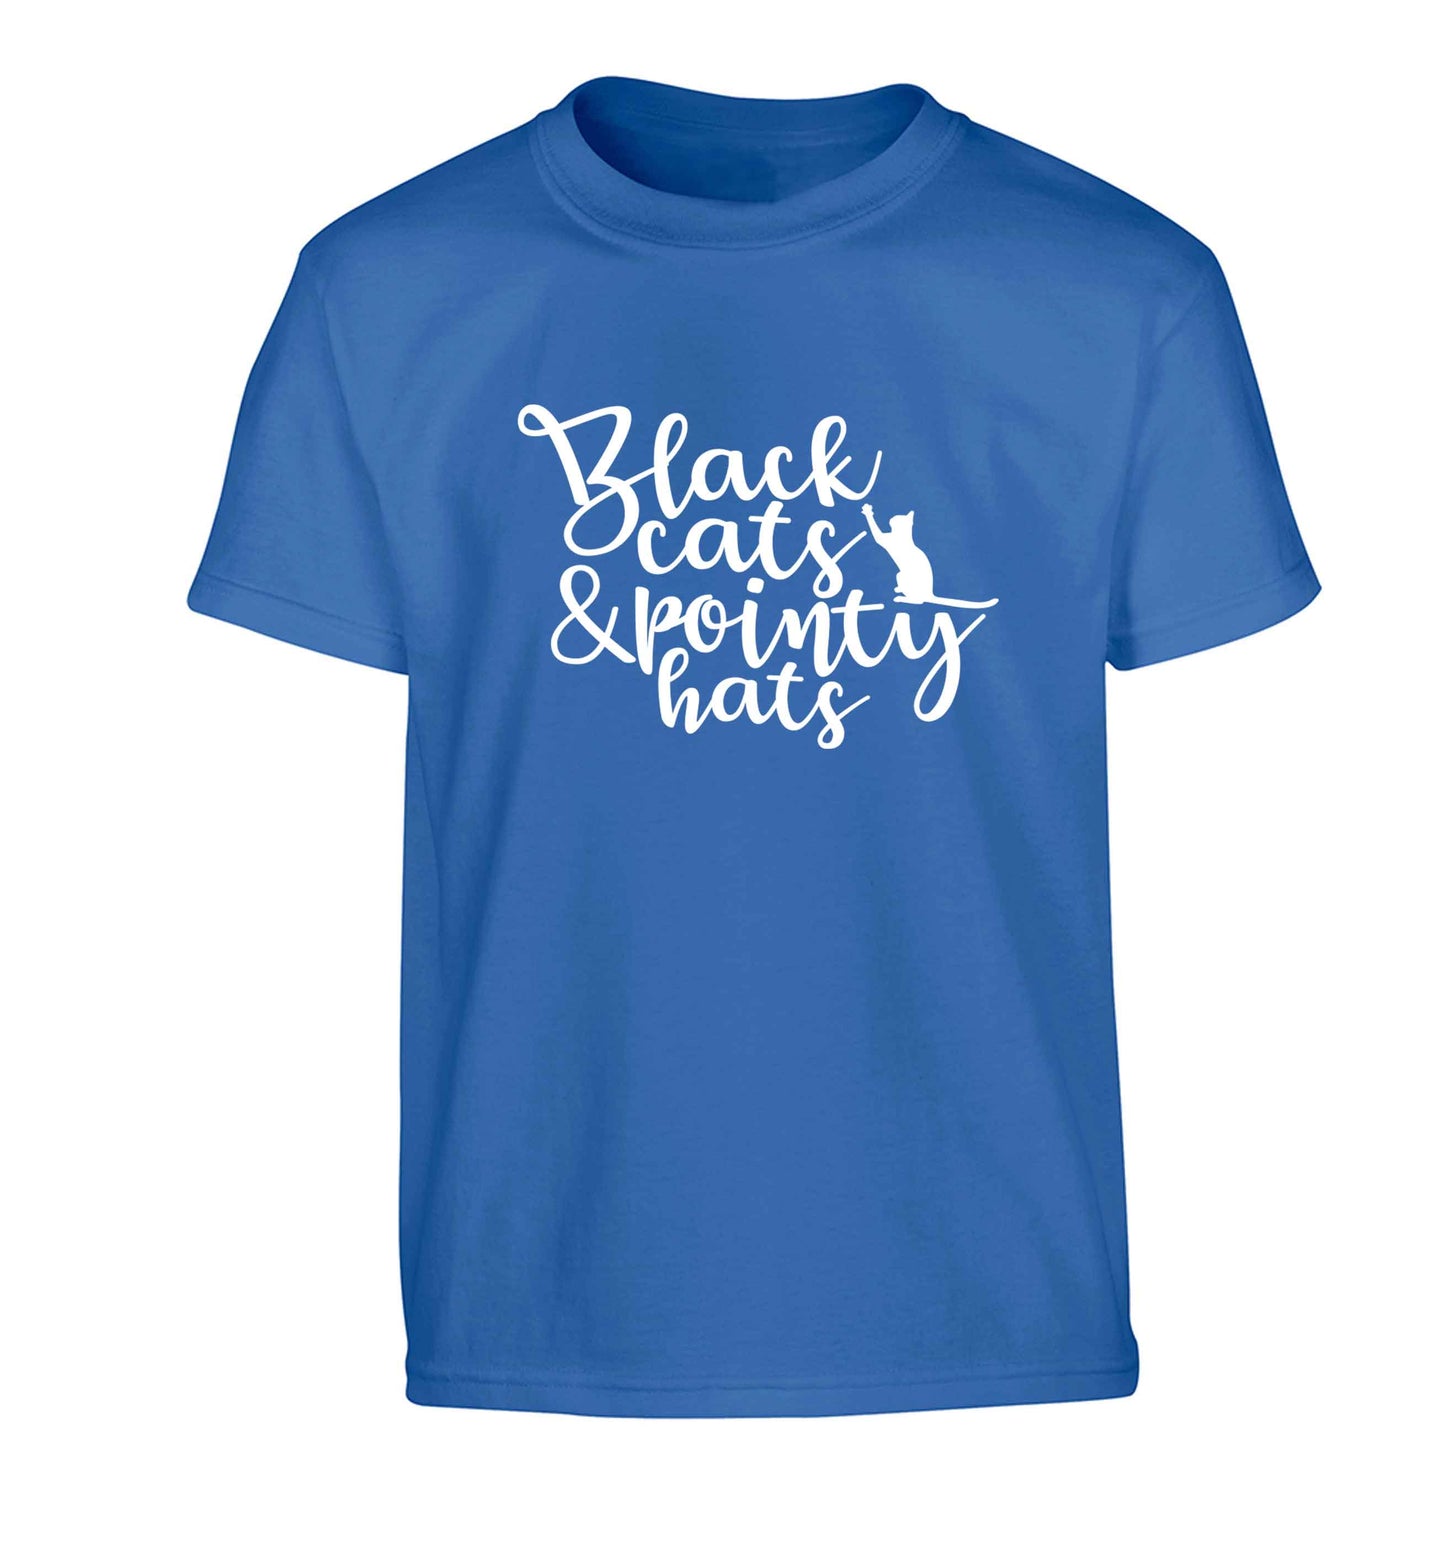 Black cats and pointy hats Children's blue Tshirt 12-13 Years